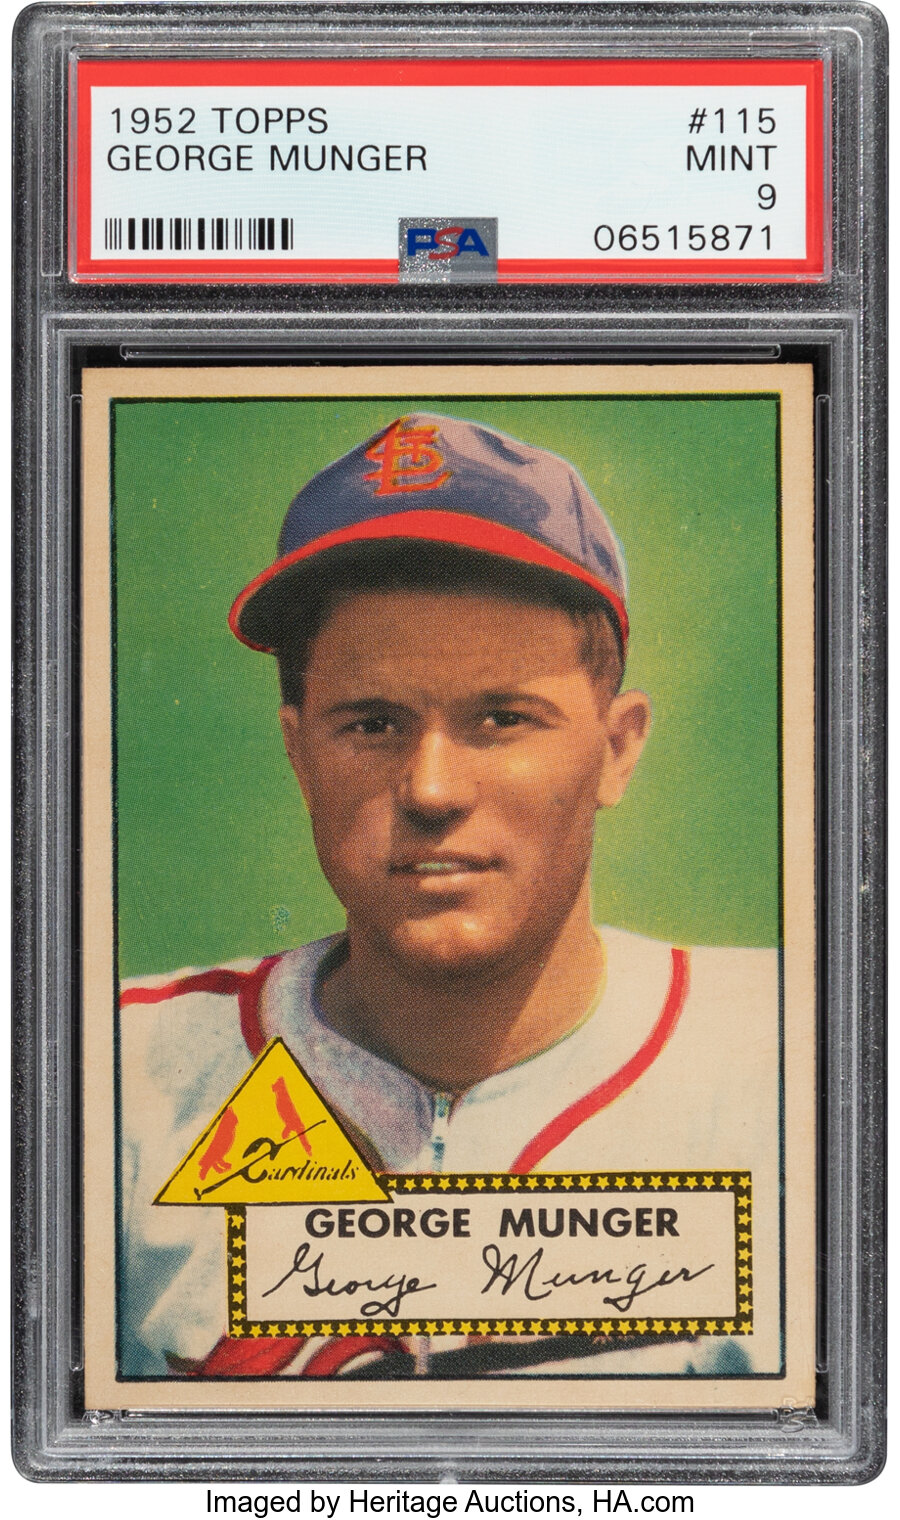 1952 Topps George Munger #115 PSA Mint 9 - None Higher